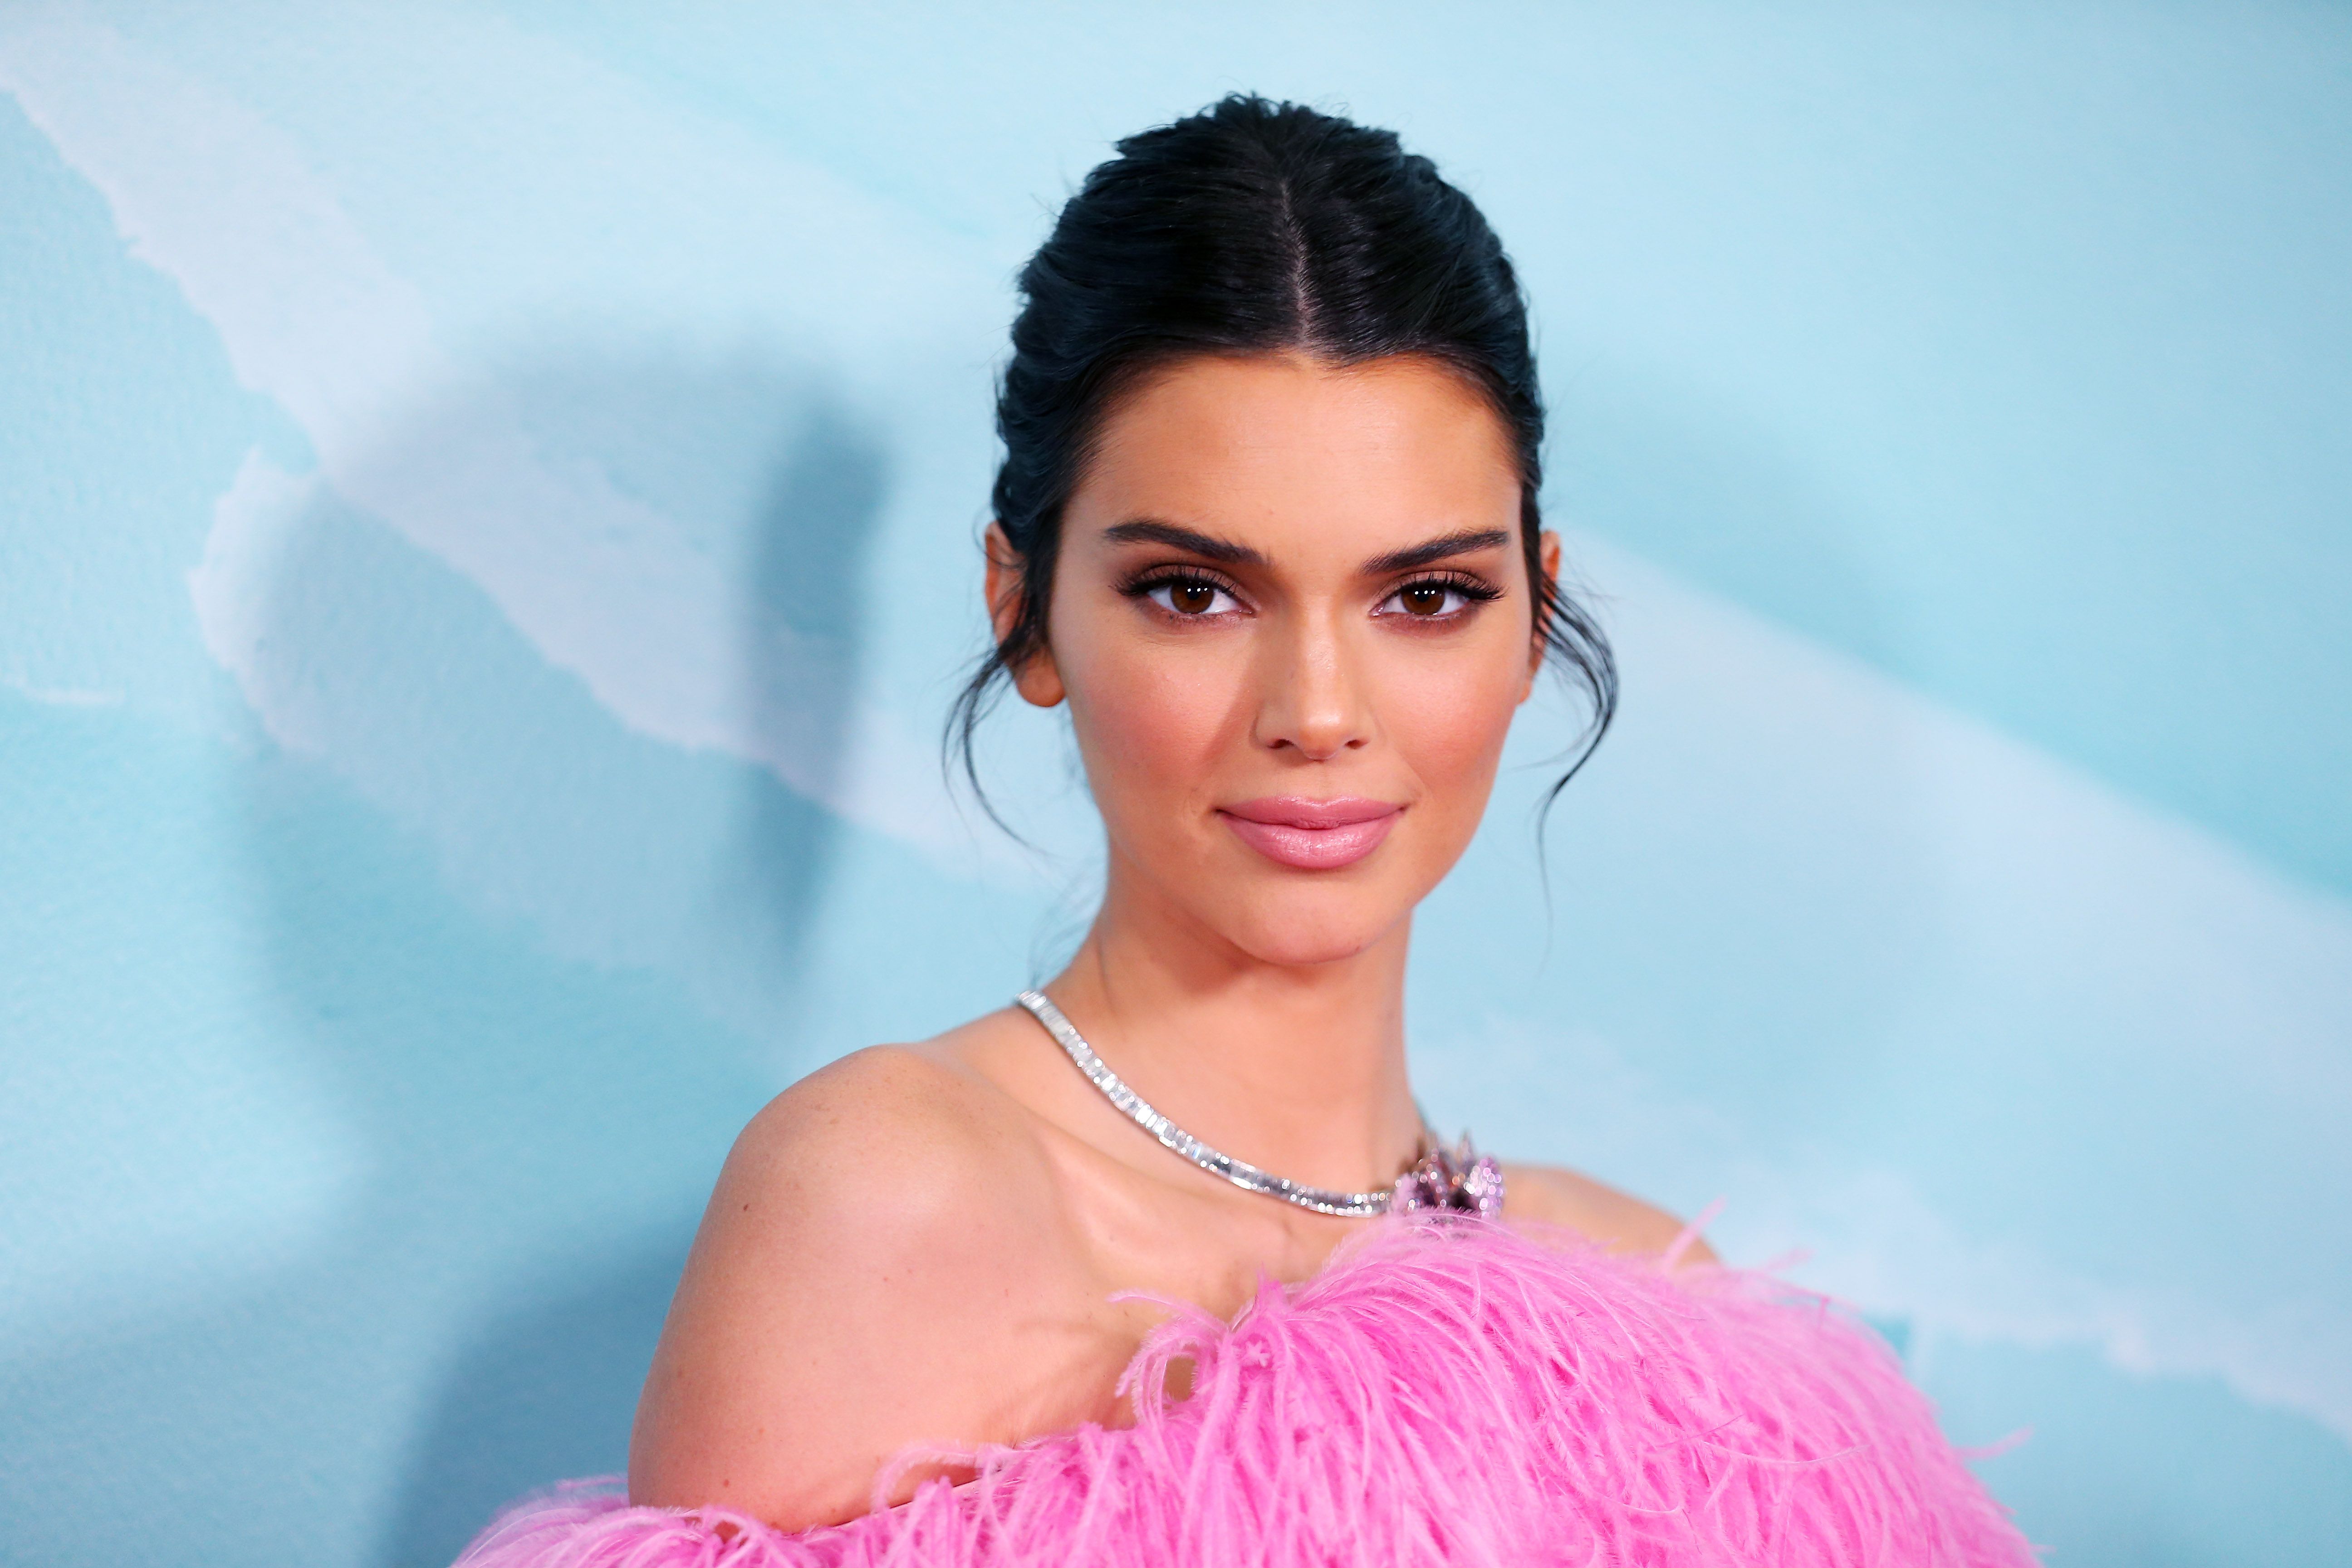 Kendall Jenner Bears it All, Wears Just a Pink Handbag For Latest  Photoshoot - News18